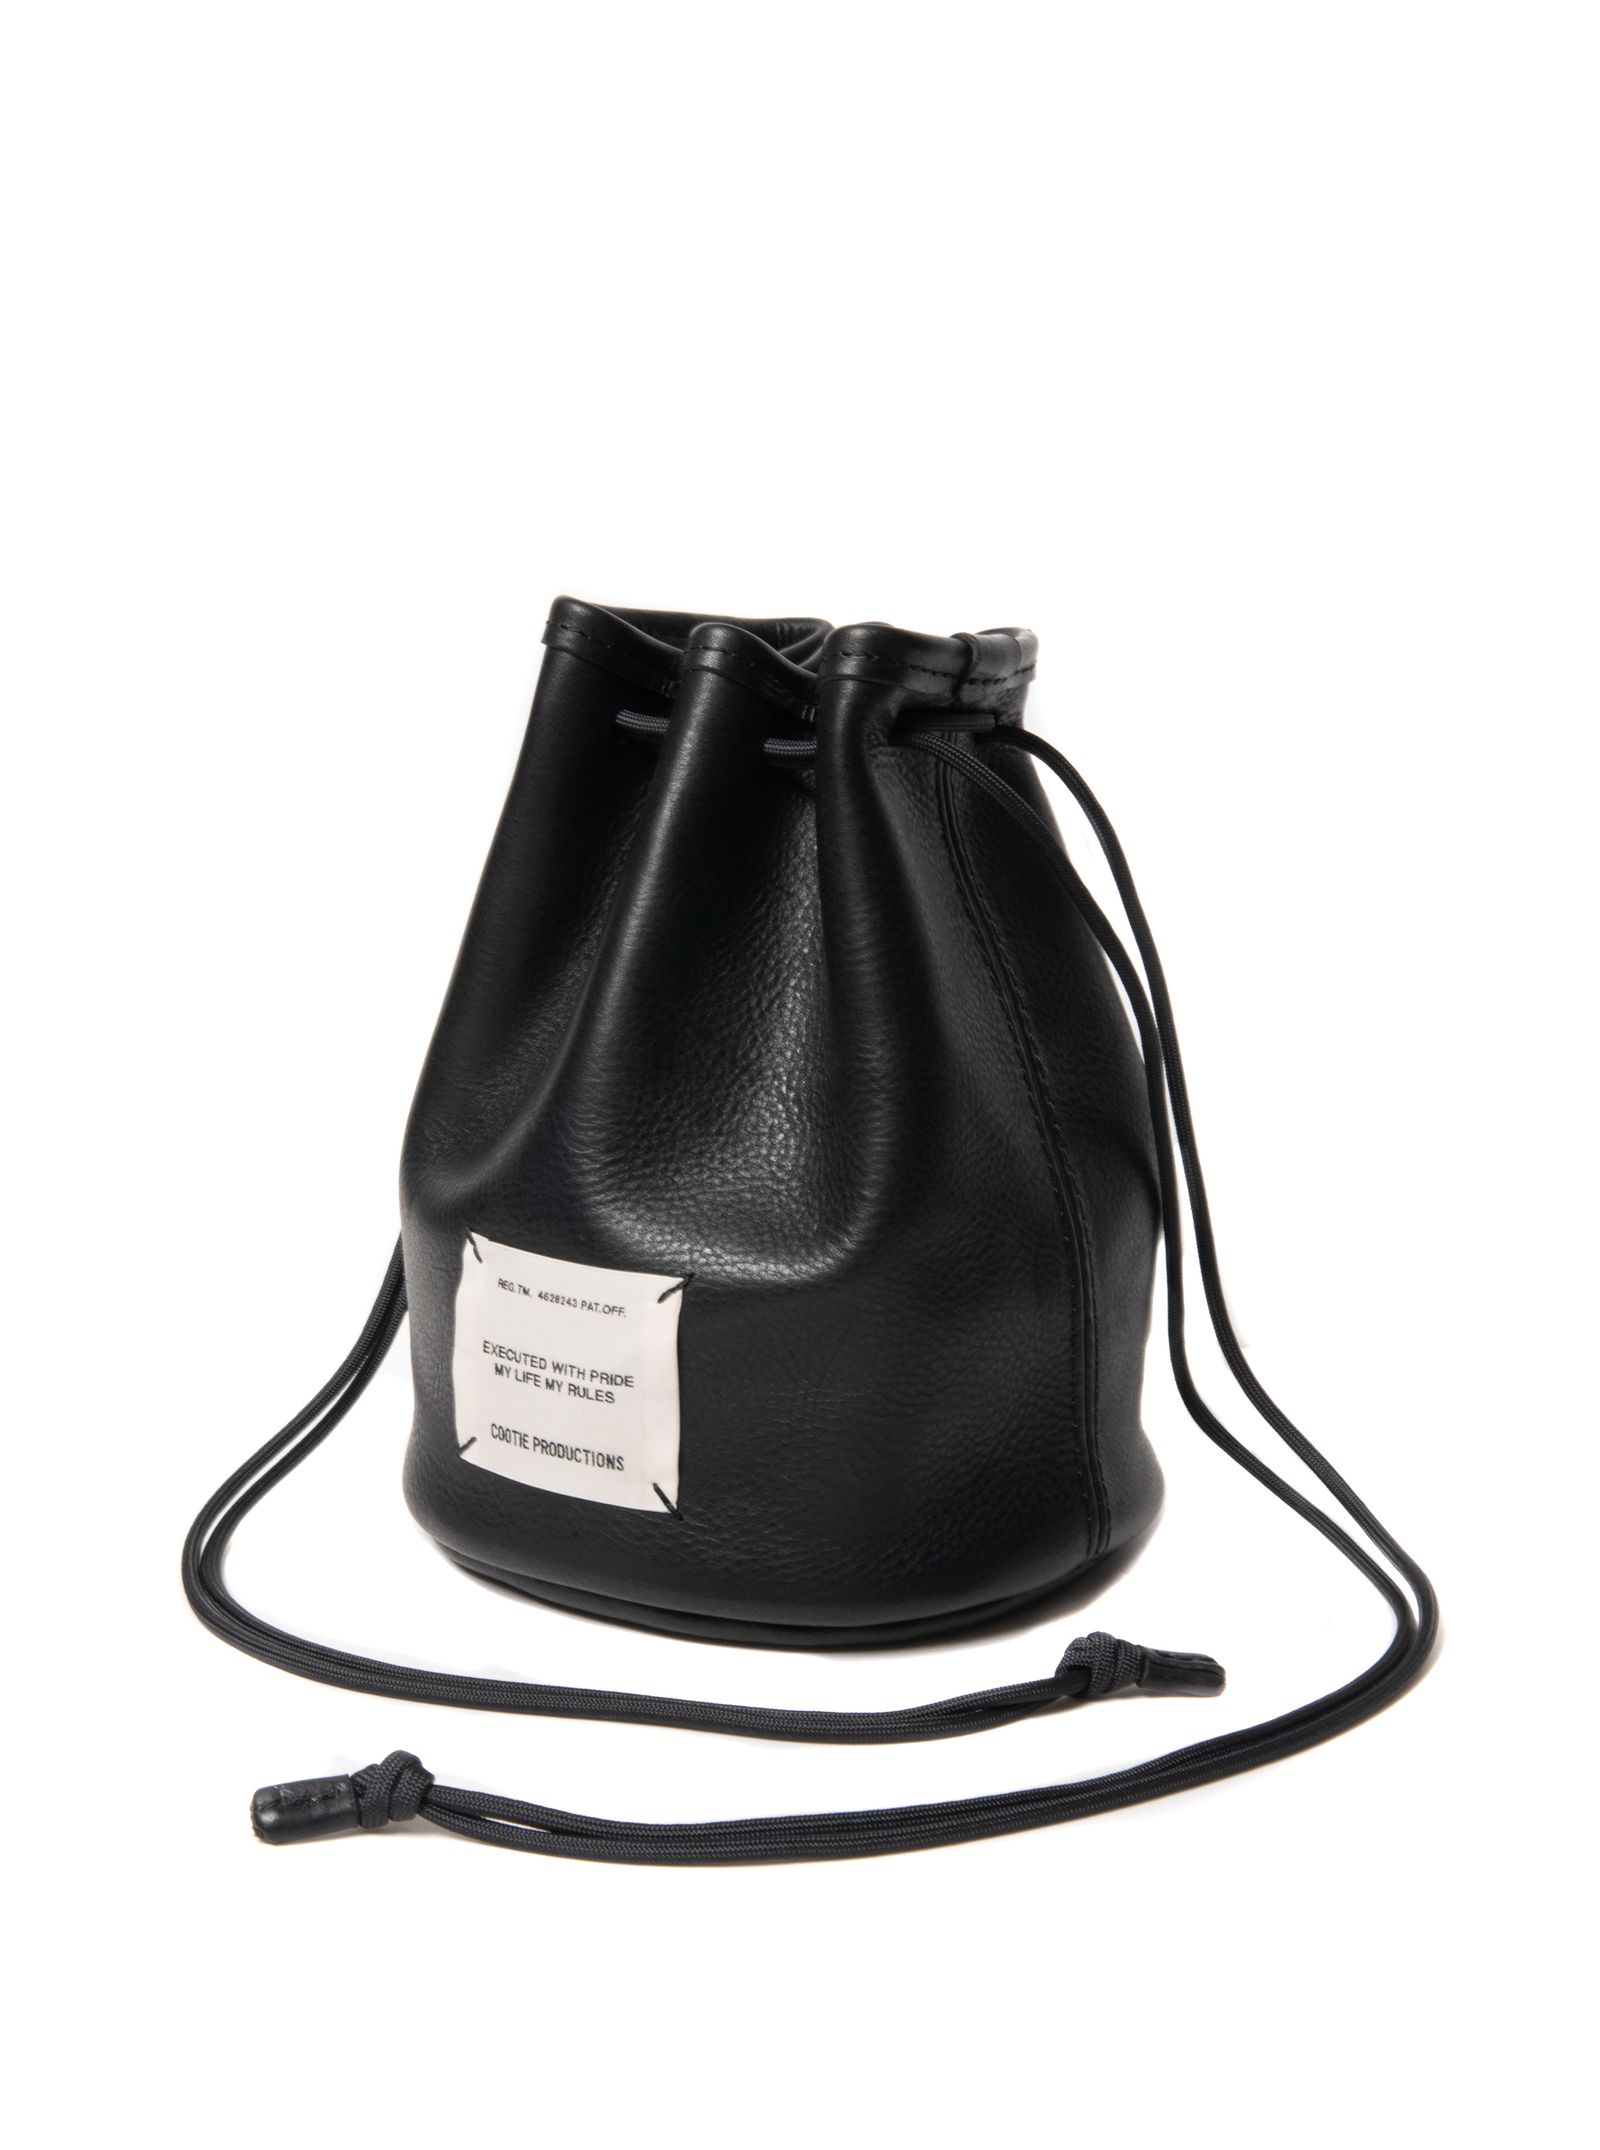 COOTIE PRODUCTIONS - Leather Bucket Bag (BLACK) / レザー 巾着